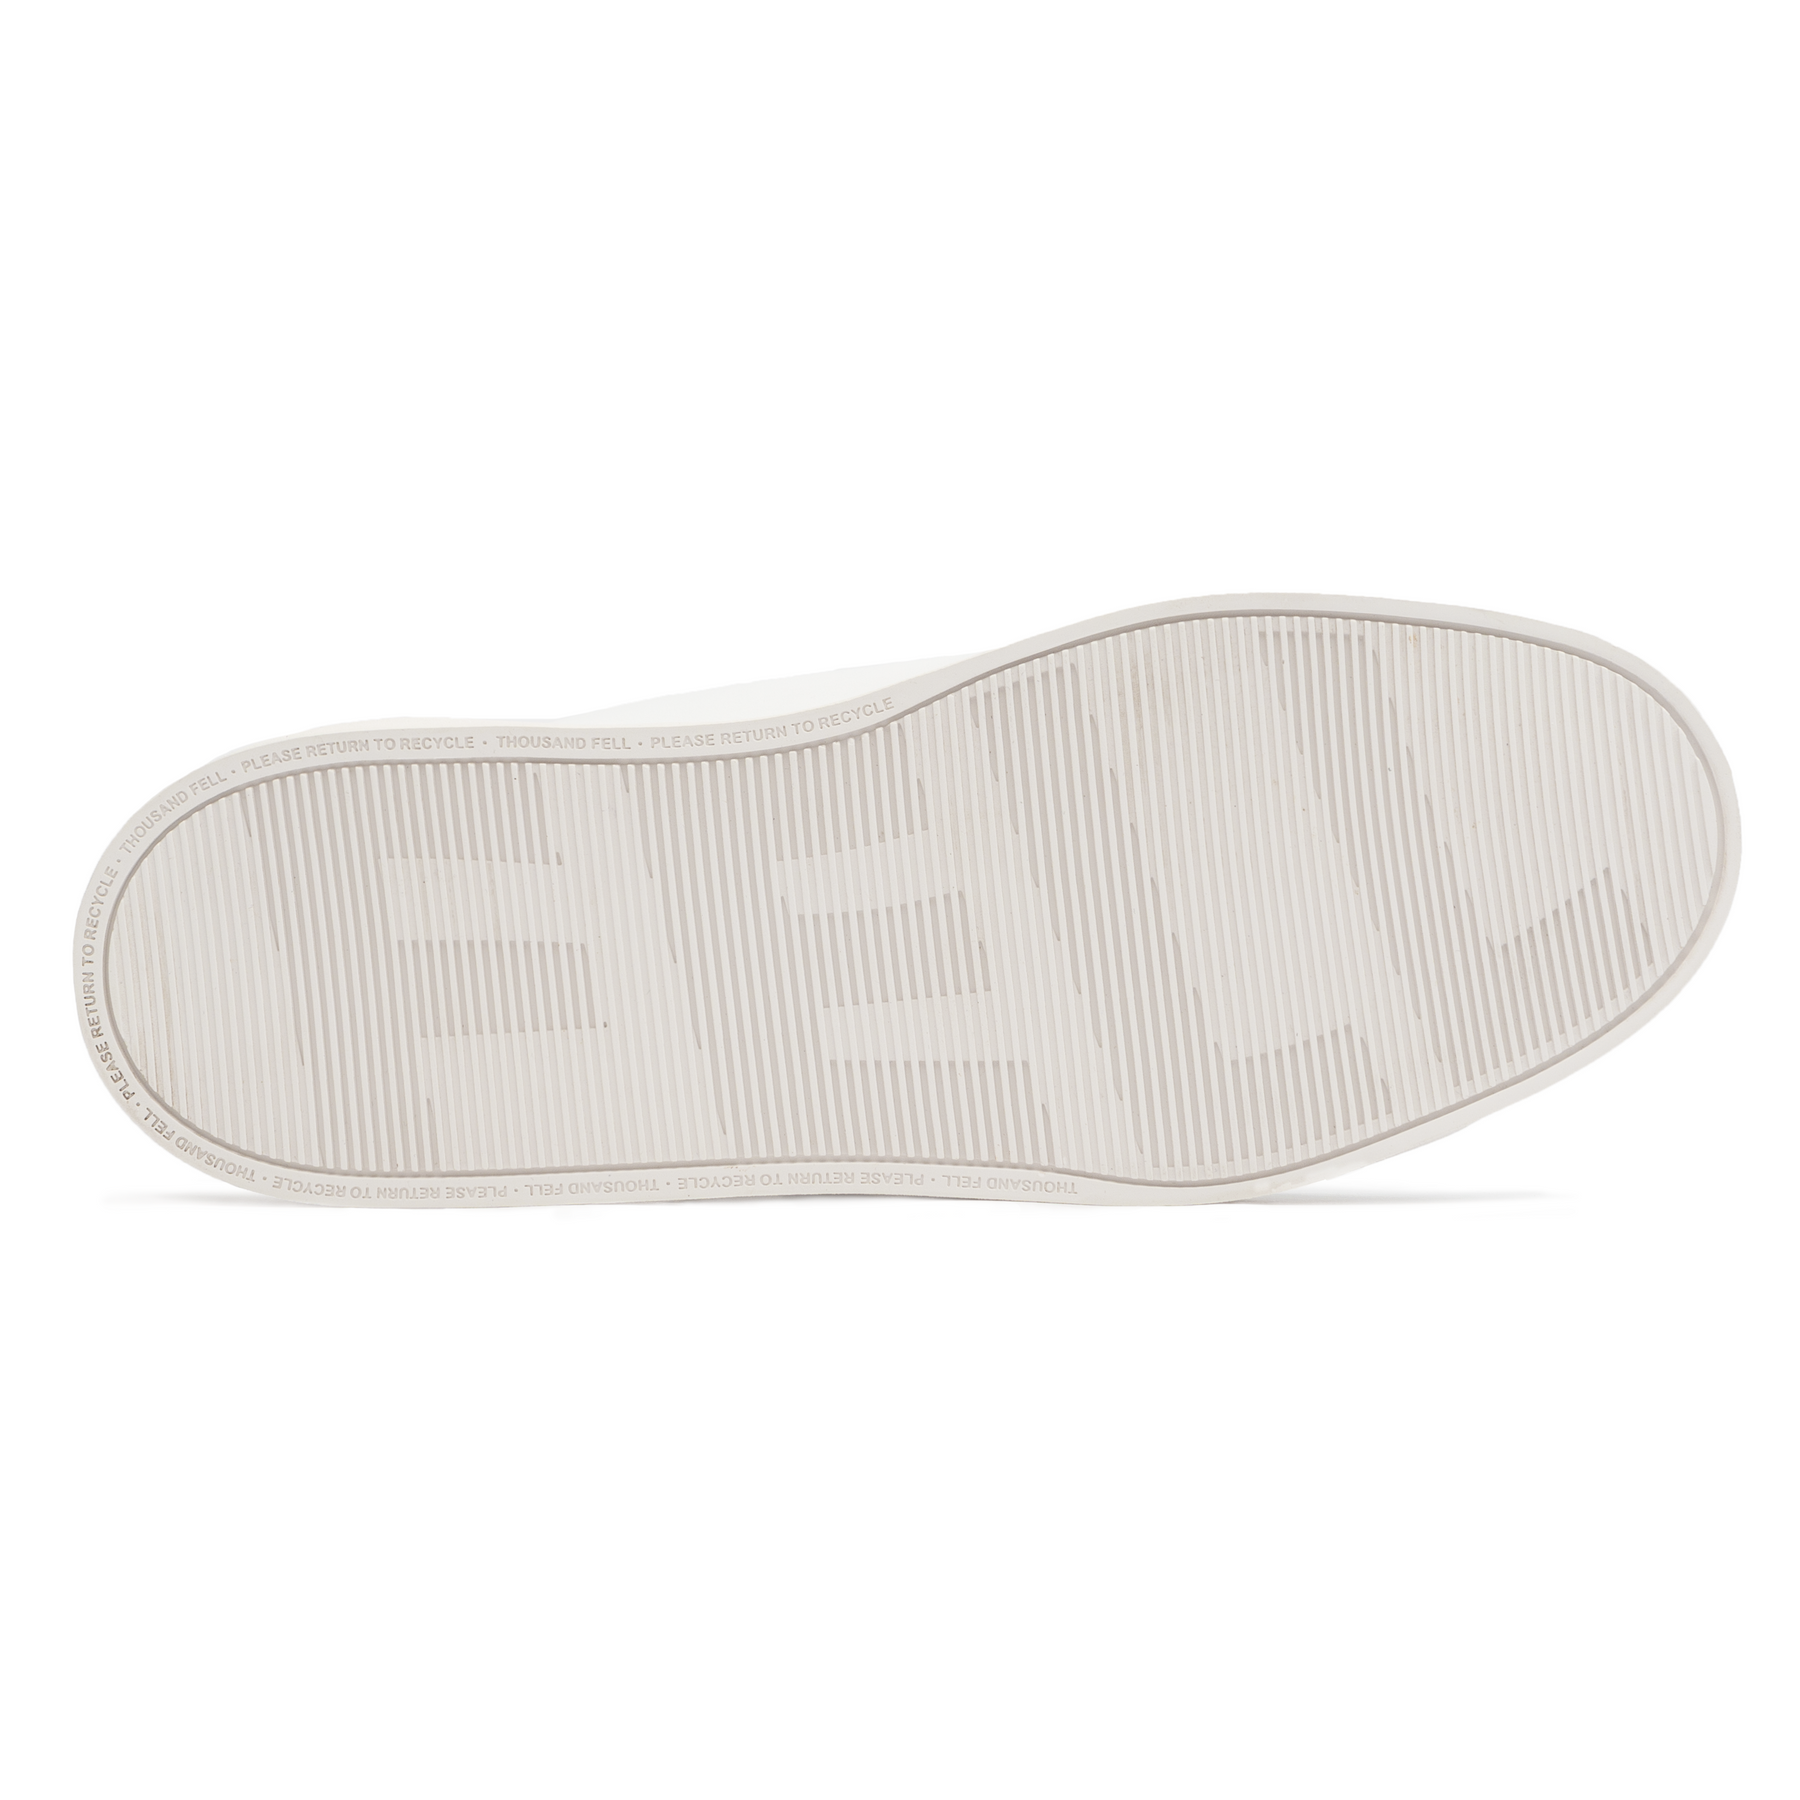 sole view of eco friendly sneaker